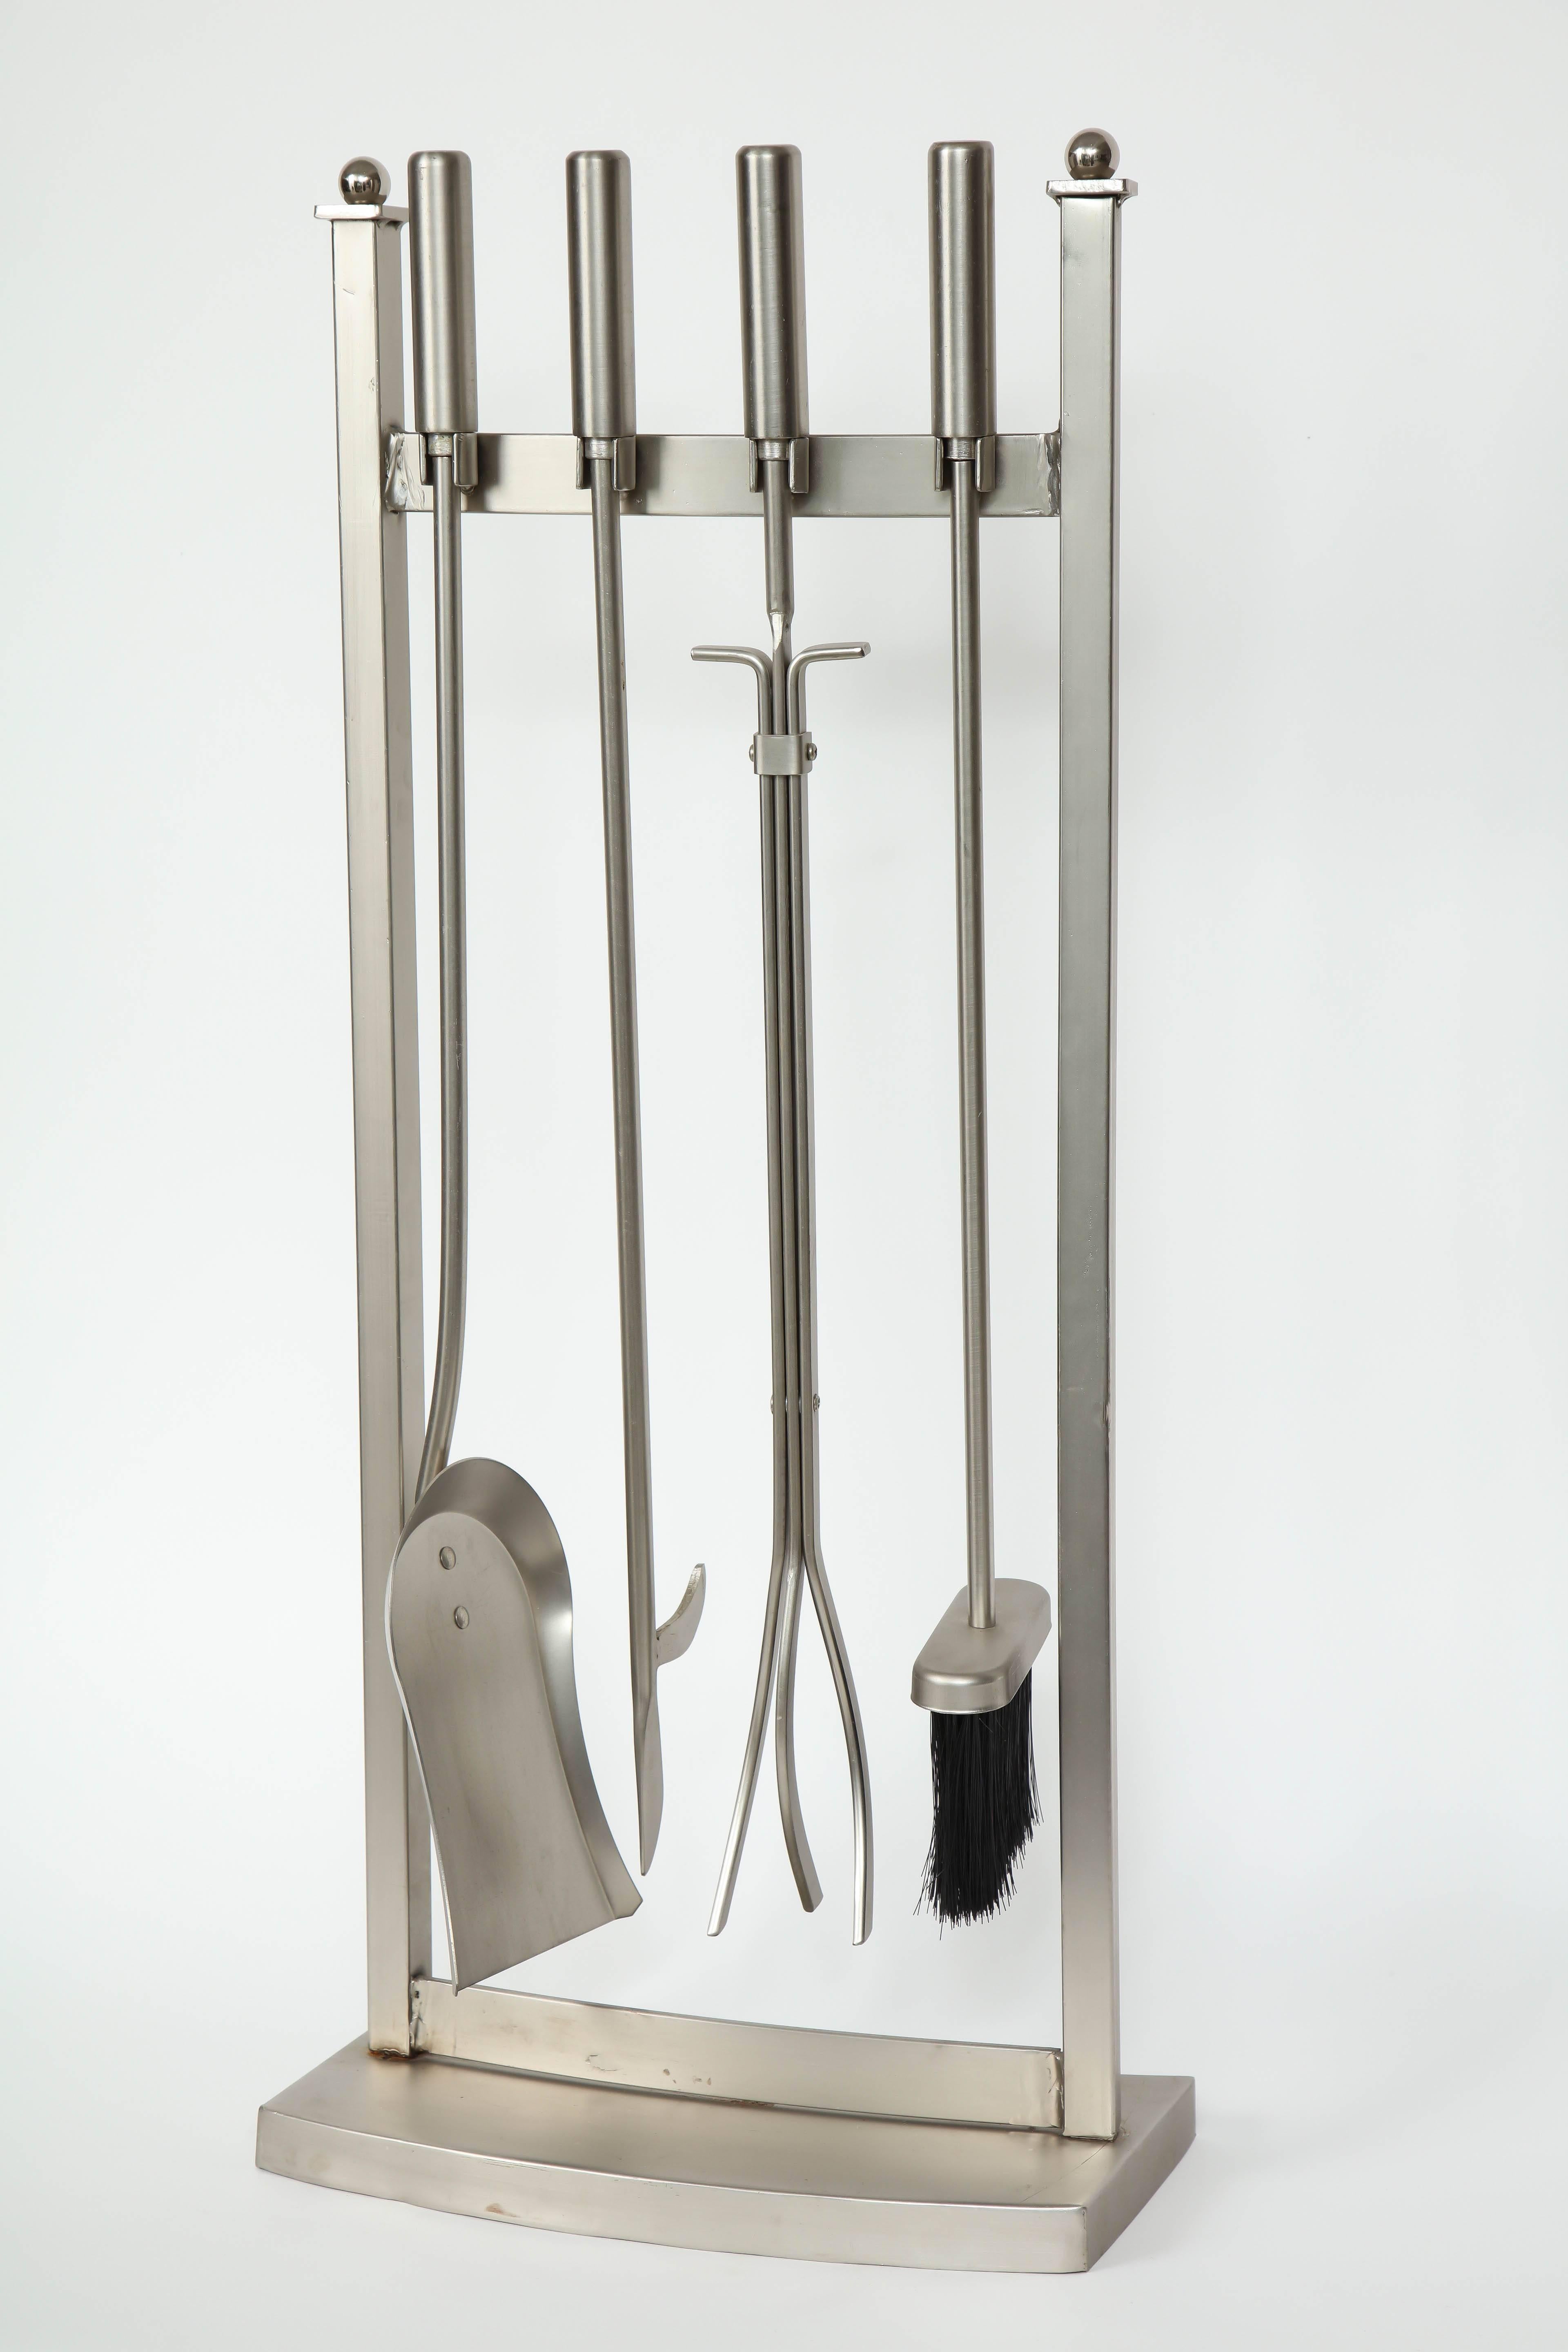 Modernist five-piece set of fireplace tools in brushed steel. Set includes stand, poker, shovel, tongs and broom.